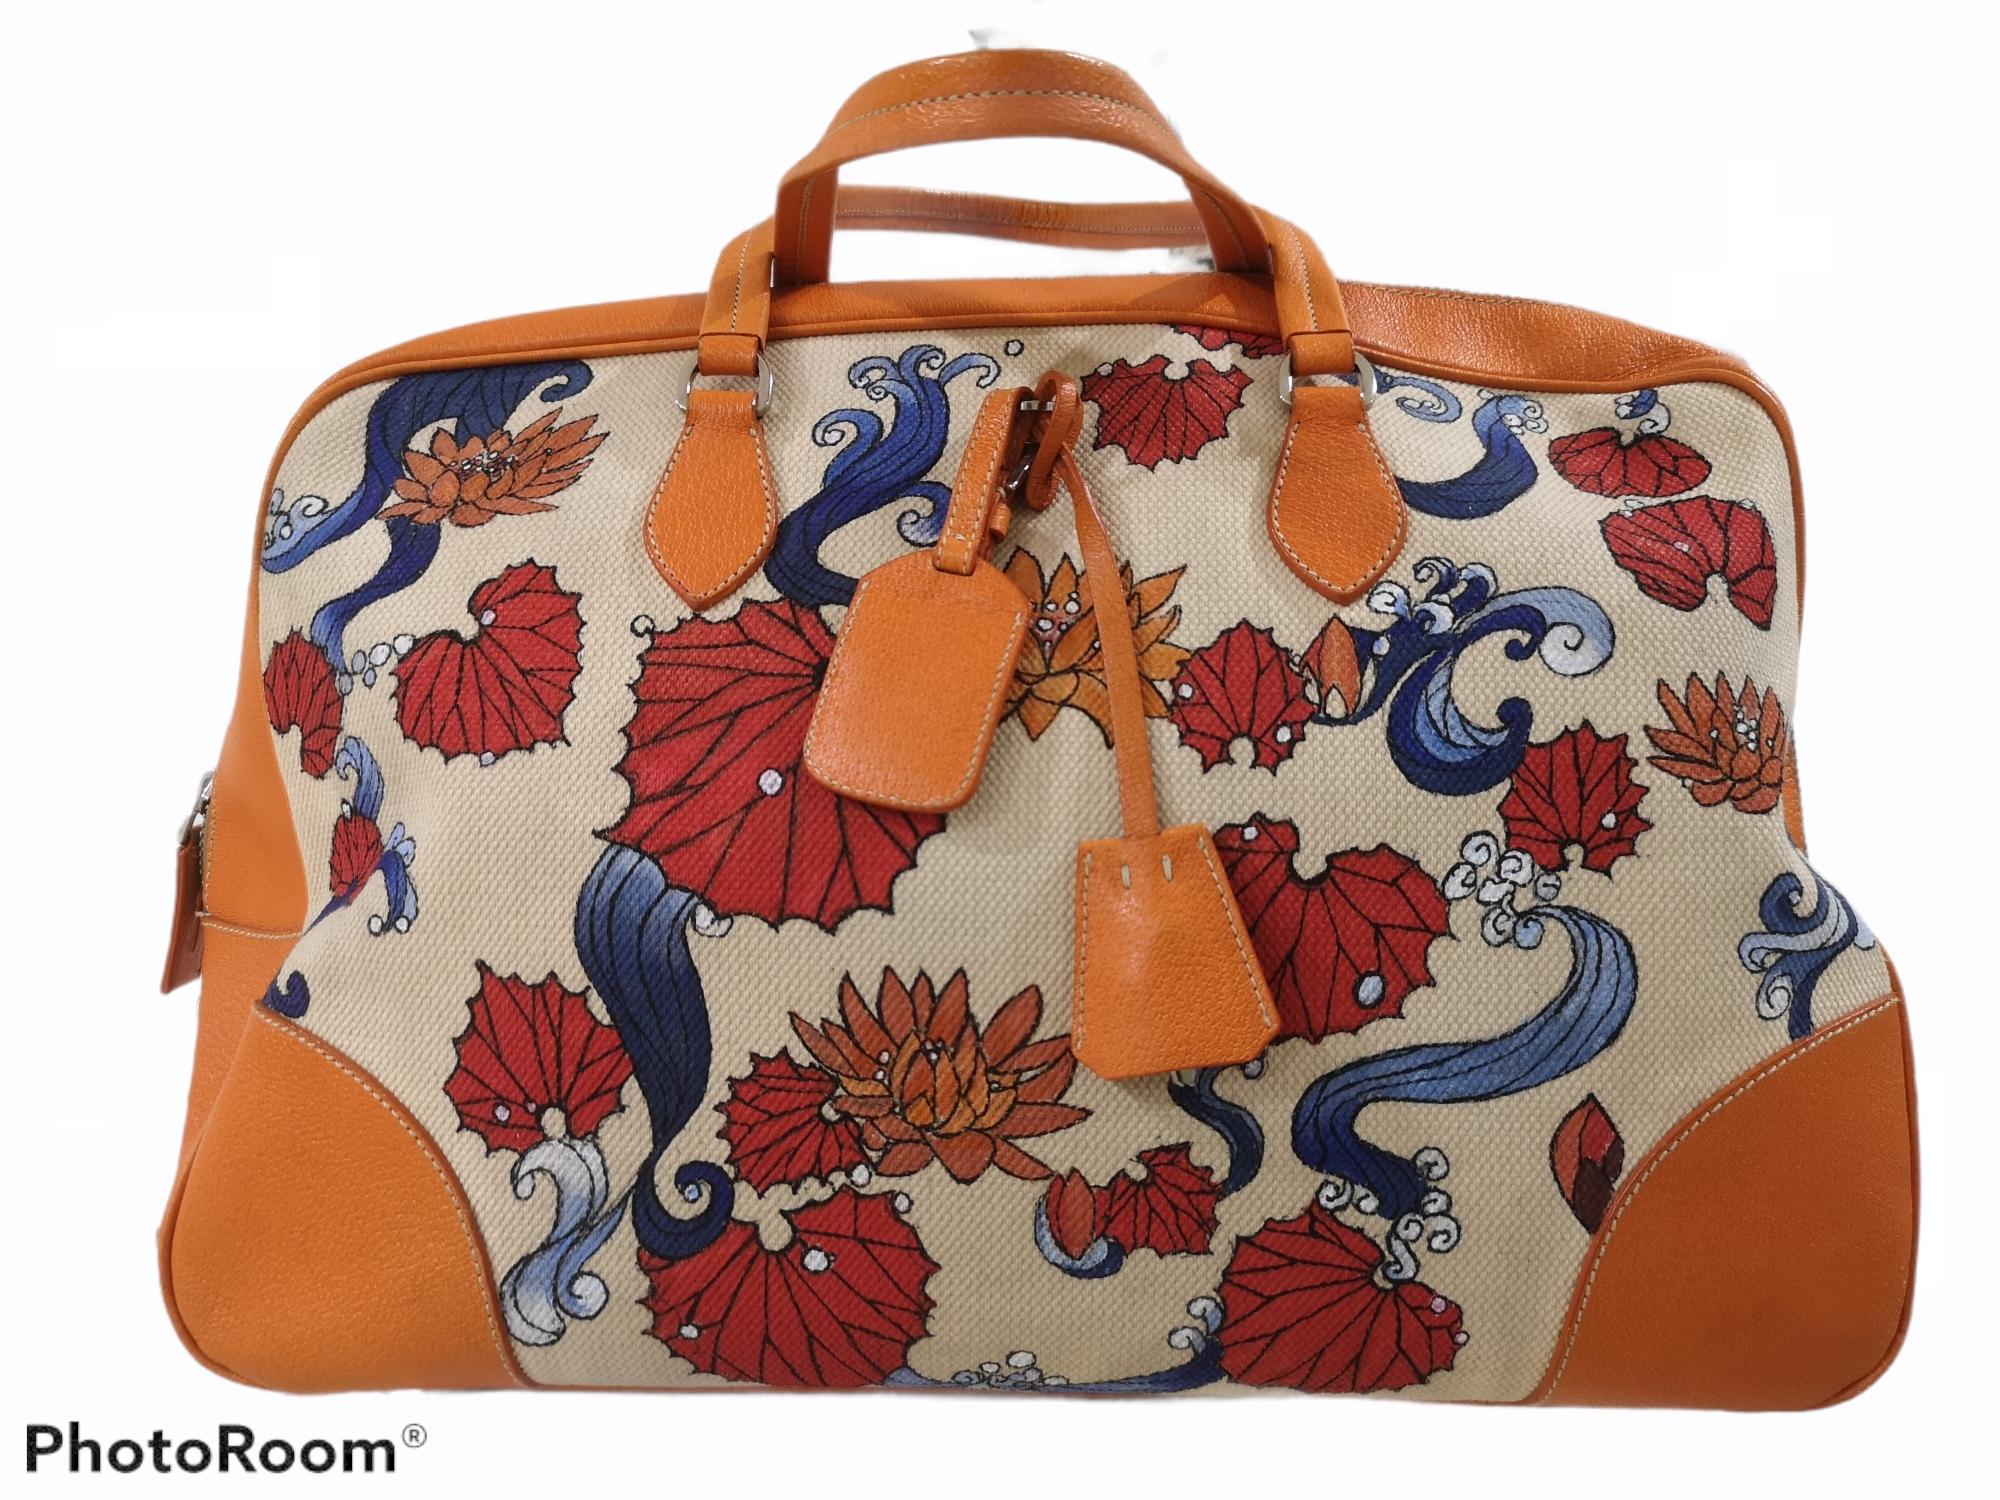 Prada orange fish painted handle shoulder bag
Orange leather, nude tone textile fish and red flowers painted on
totally made in italy
measurements: 45*30 x 17 depth cm 